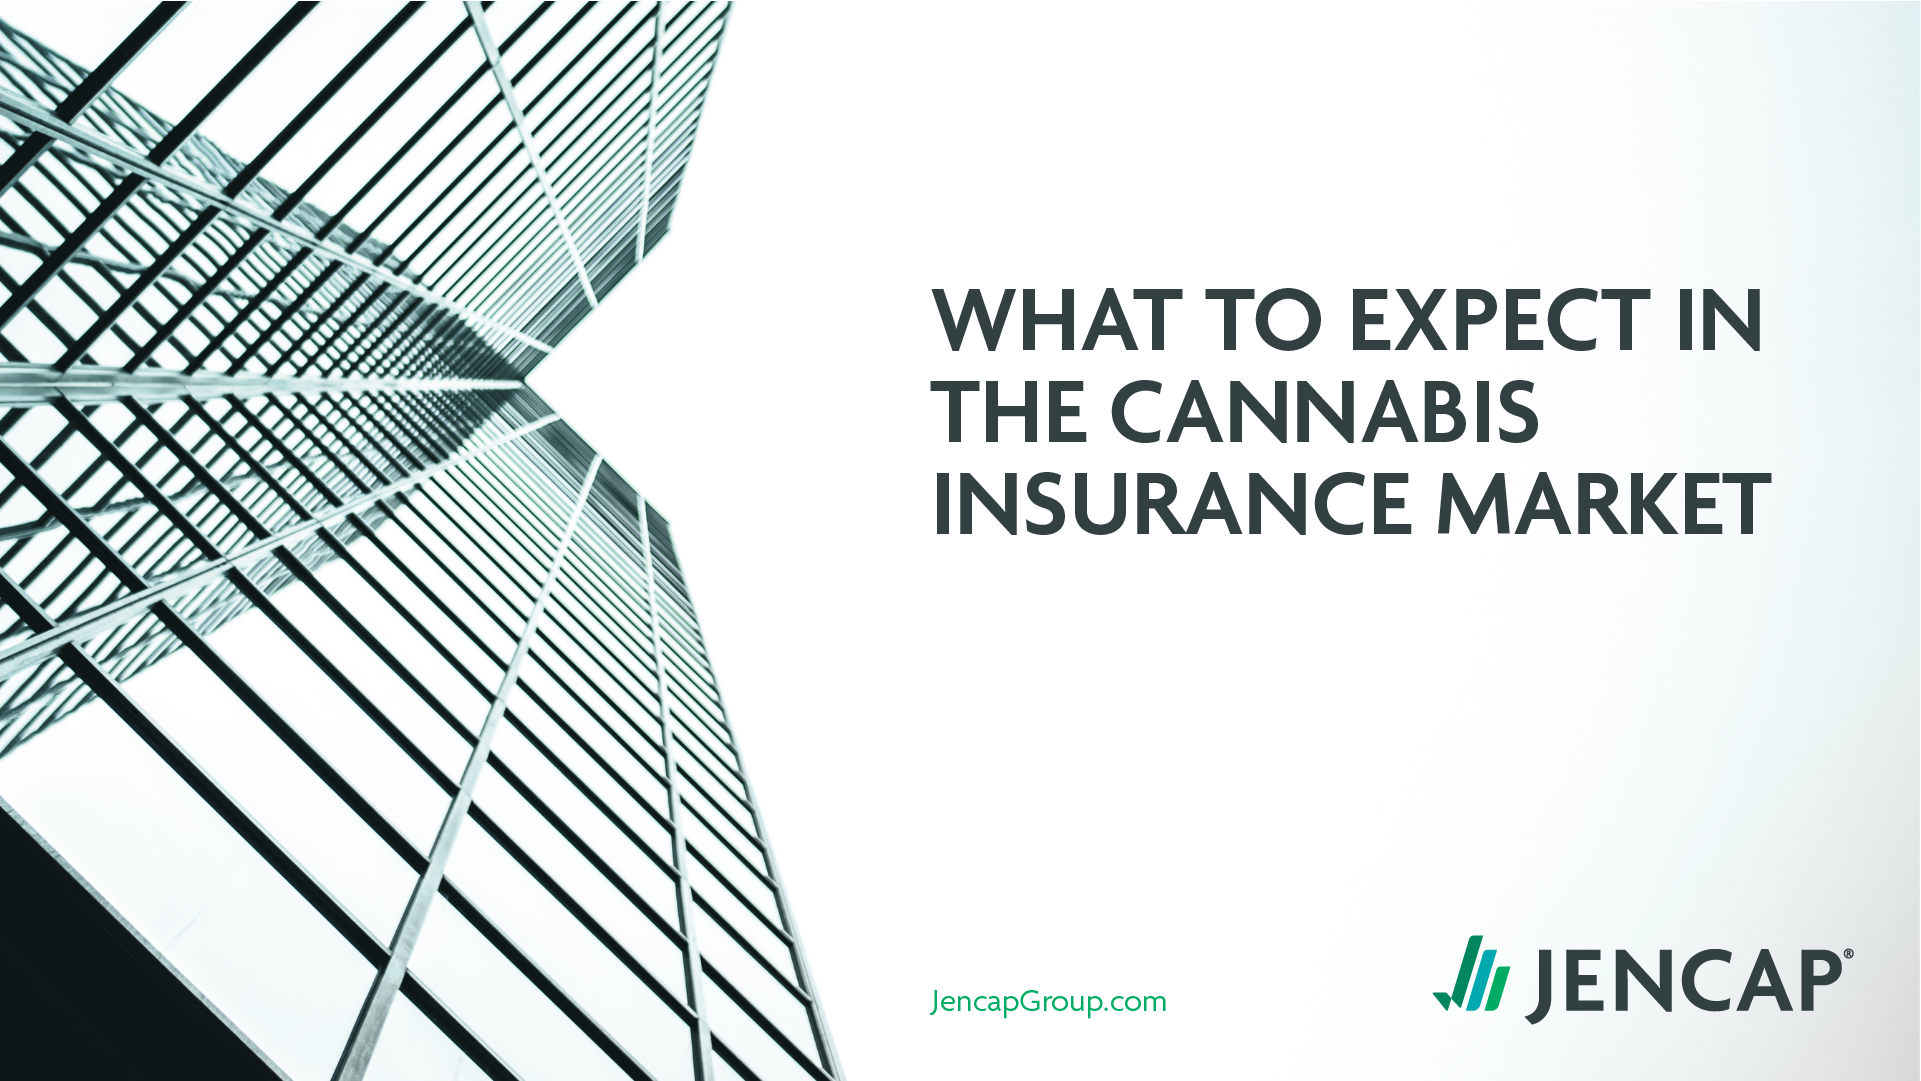 What to Expect in the Cannabis Insurance Market